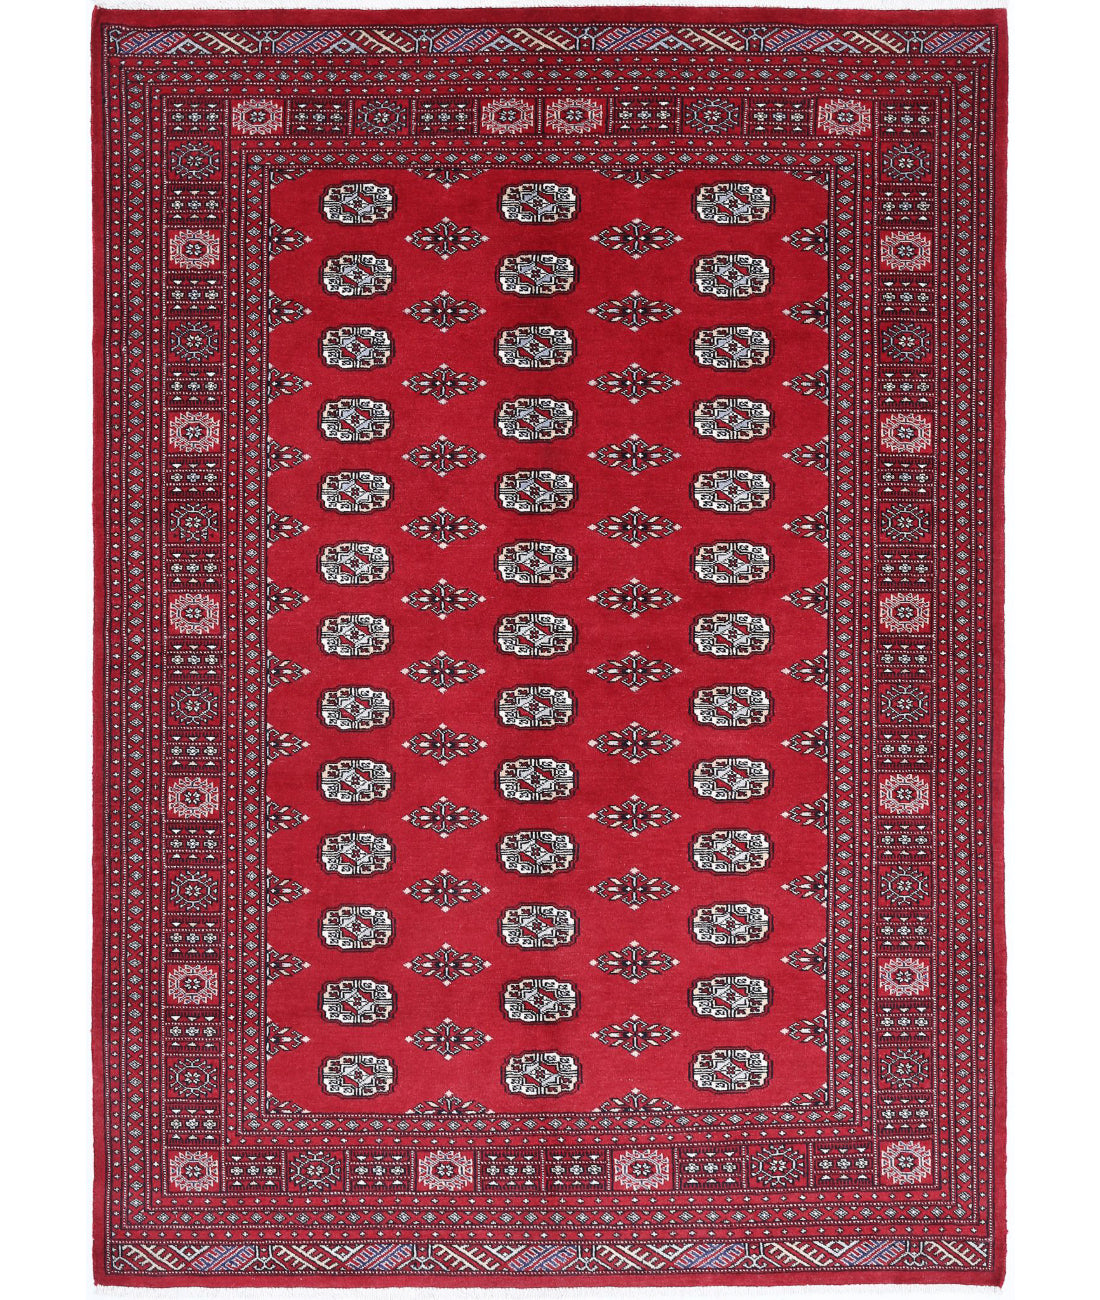 Hand Knotted Tribal Bokhara Wool Rug - 5'9'' x 8'3'' 5'9'' x 8'3'' (173 X 248) / Red / Black